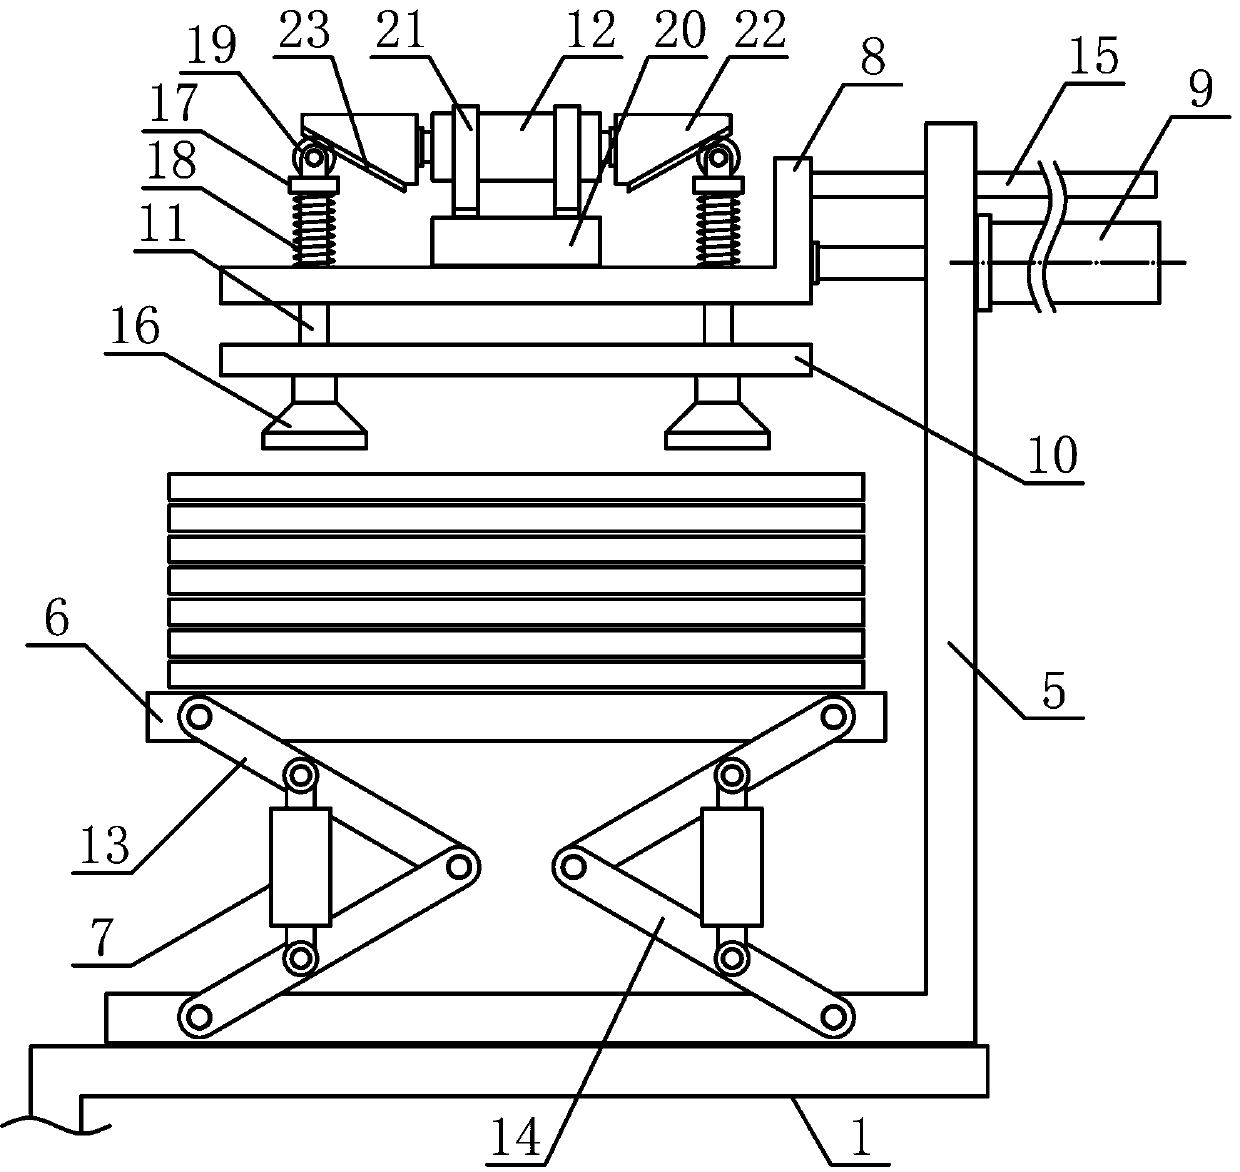 Panel transferring and overturning mechanism